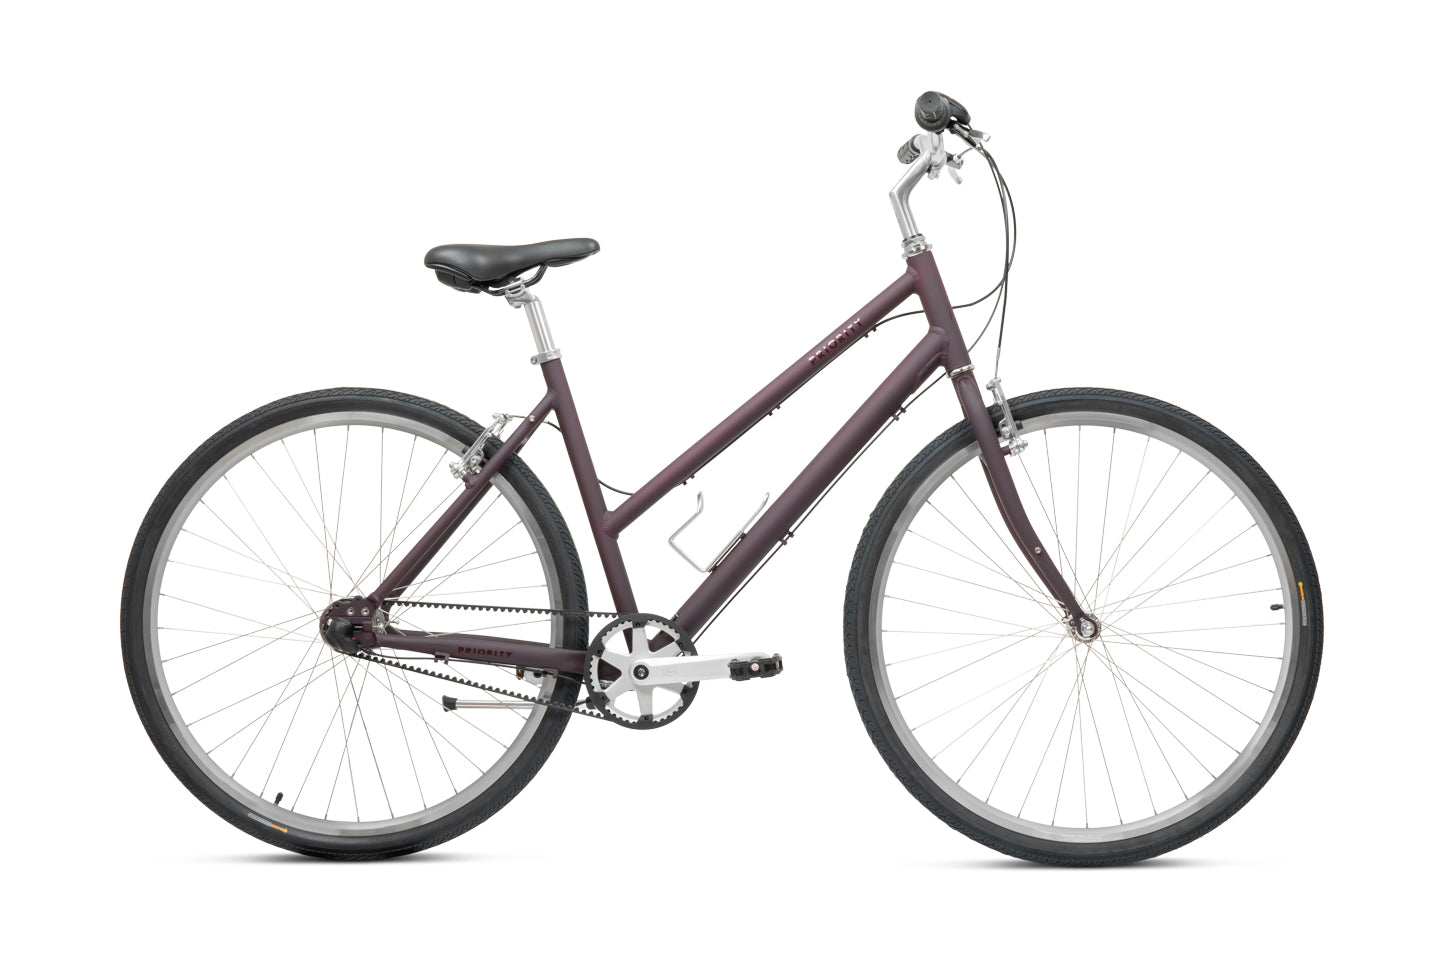 Priority Bicycle with commuter style handlebars